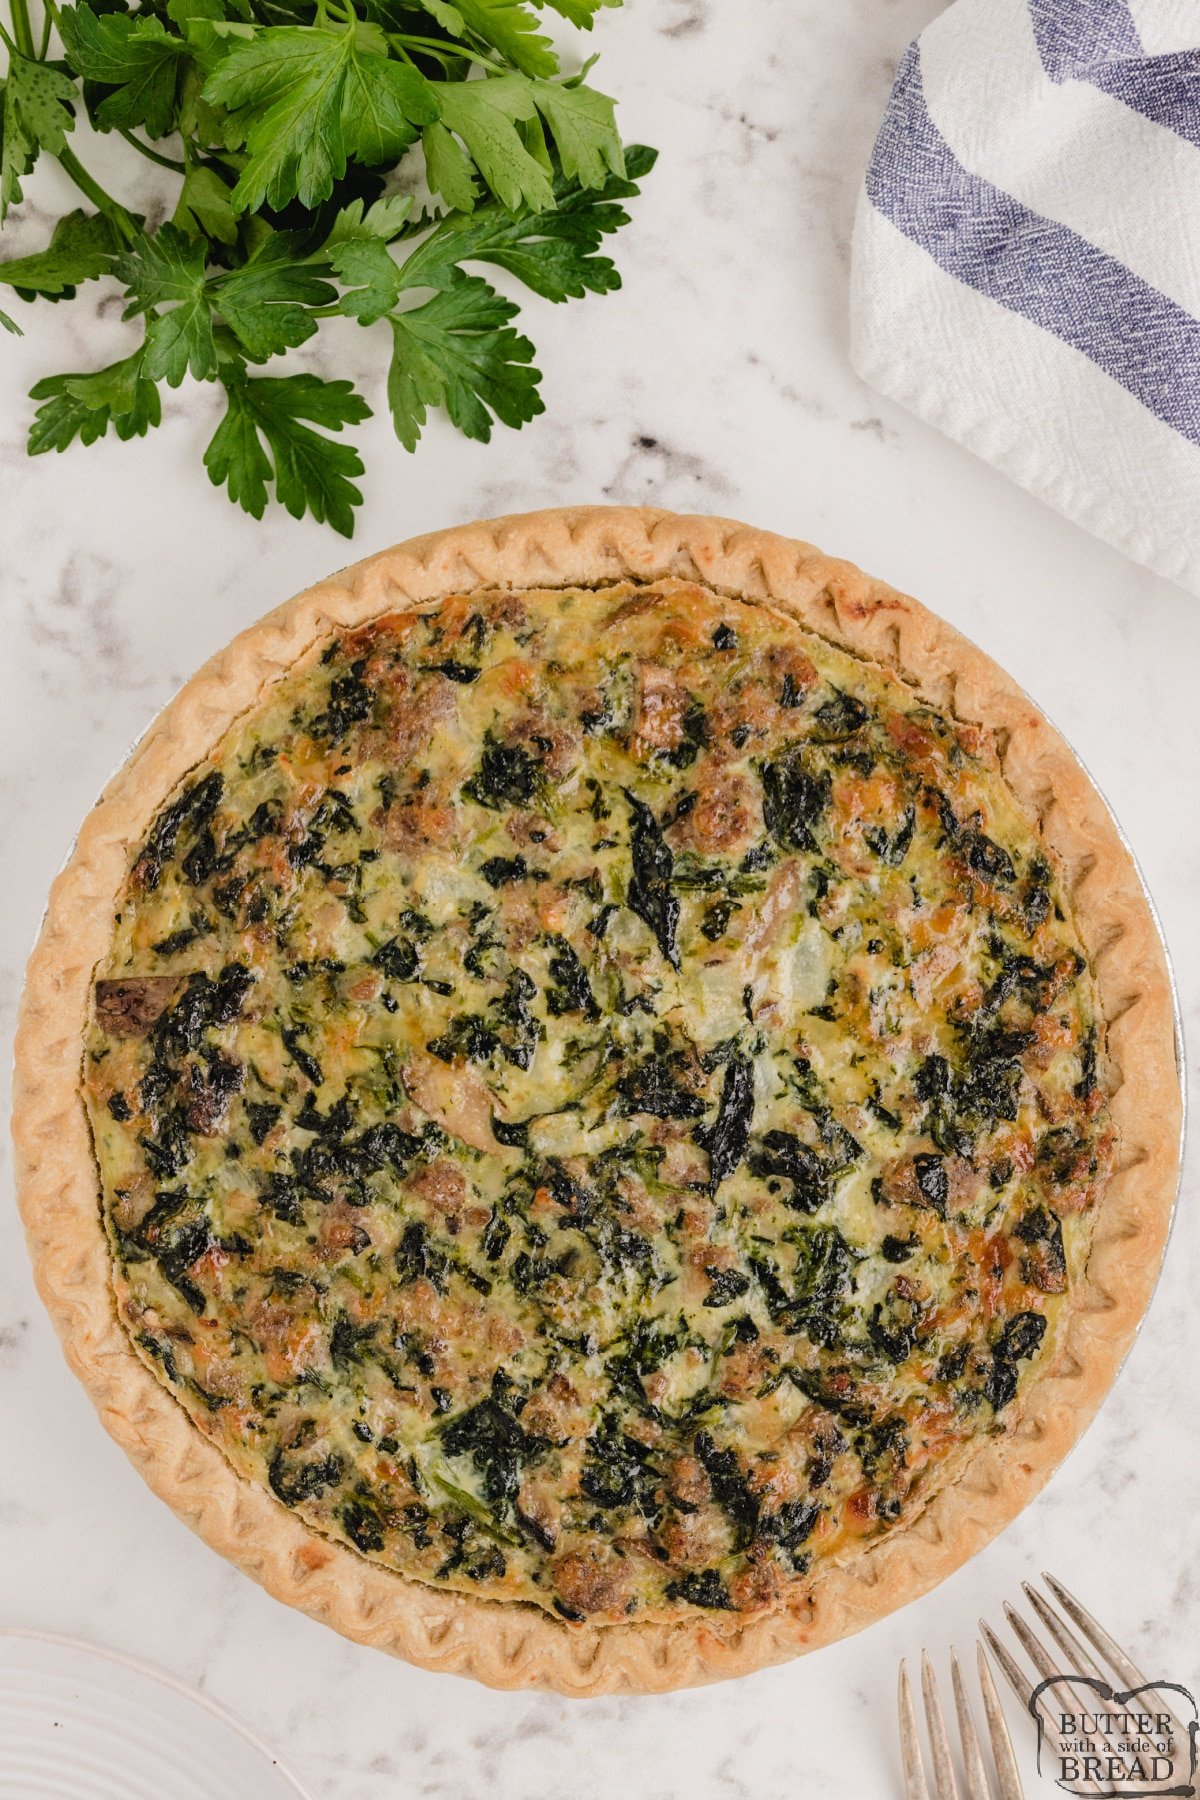 Best Quiche recipe made with spinach, sausage, mushrooms and three kinds of cheese! Easy quiche recipe that is delicious!